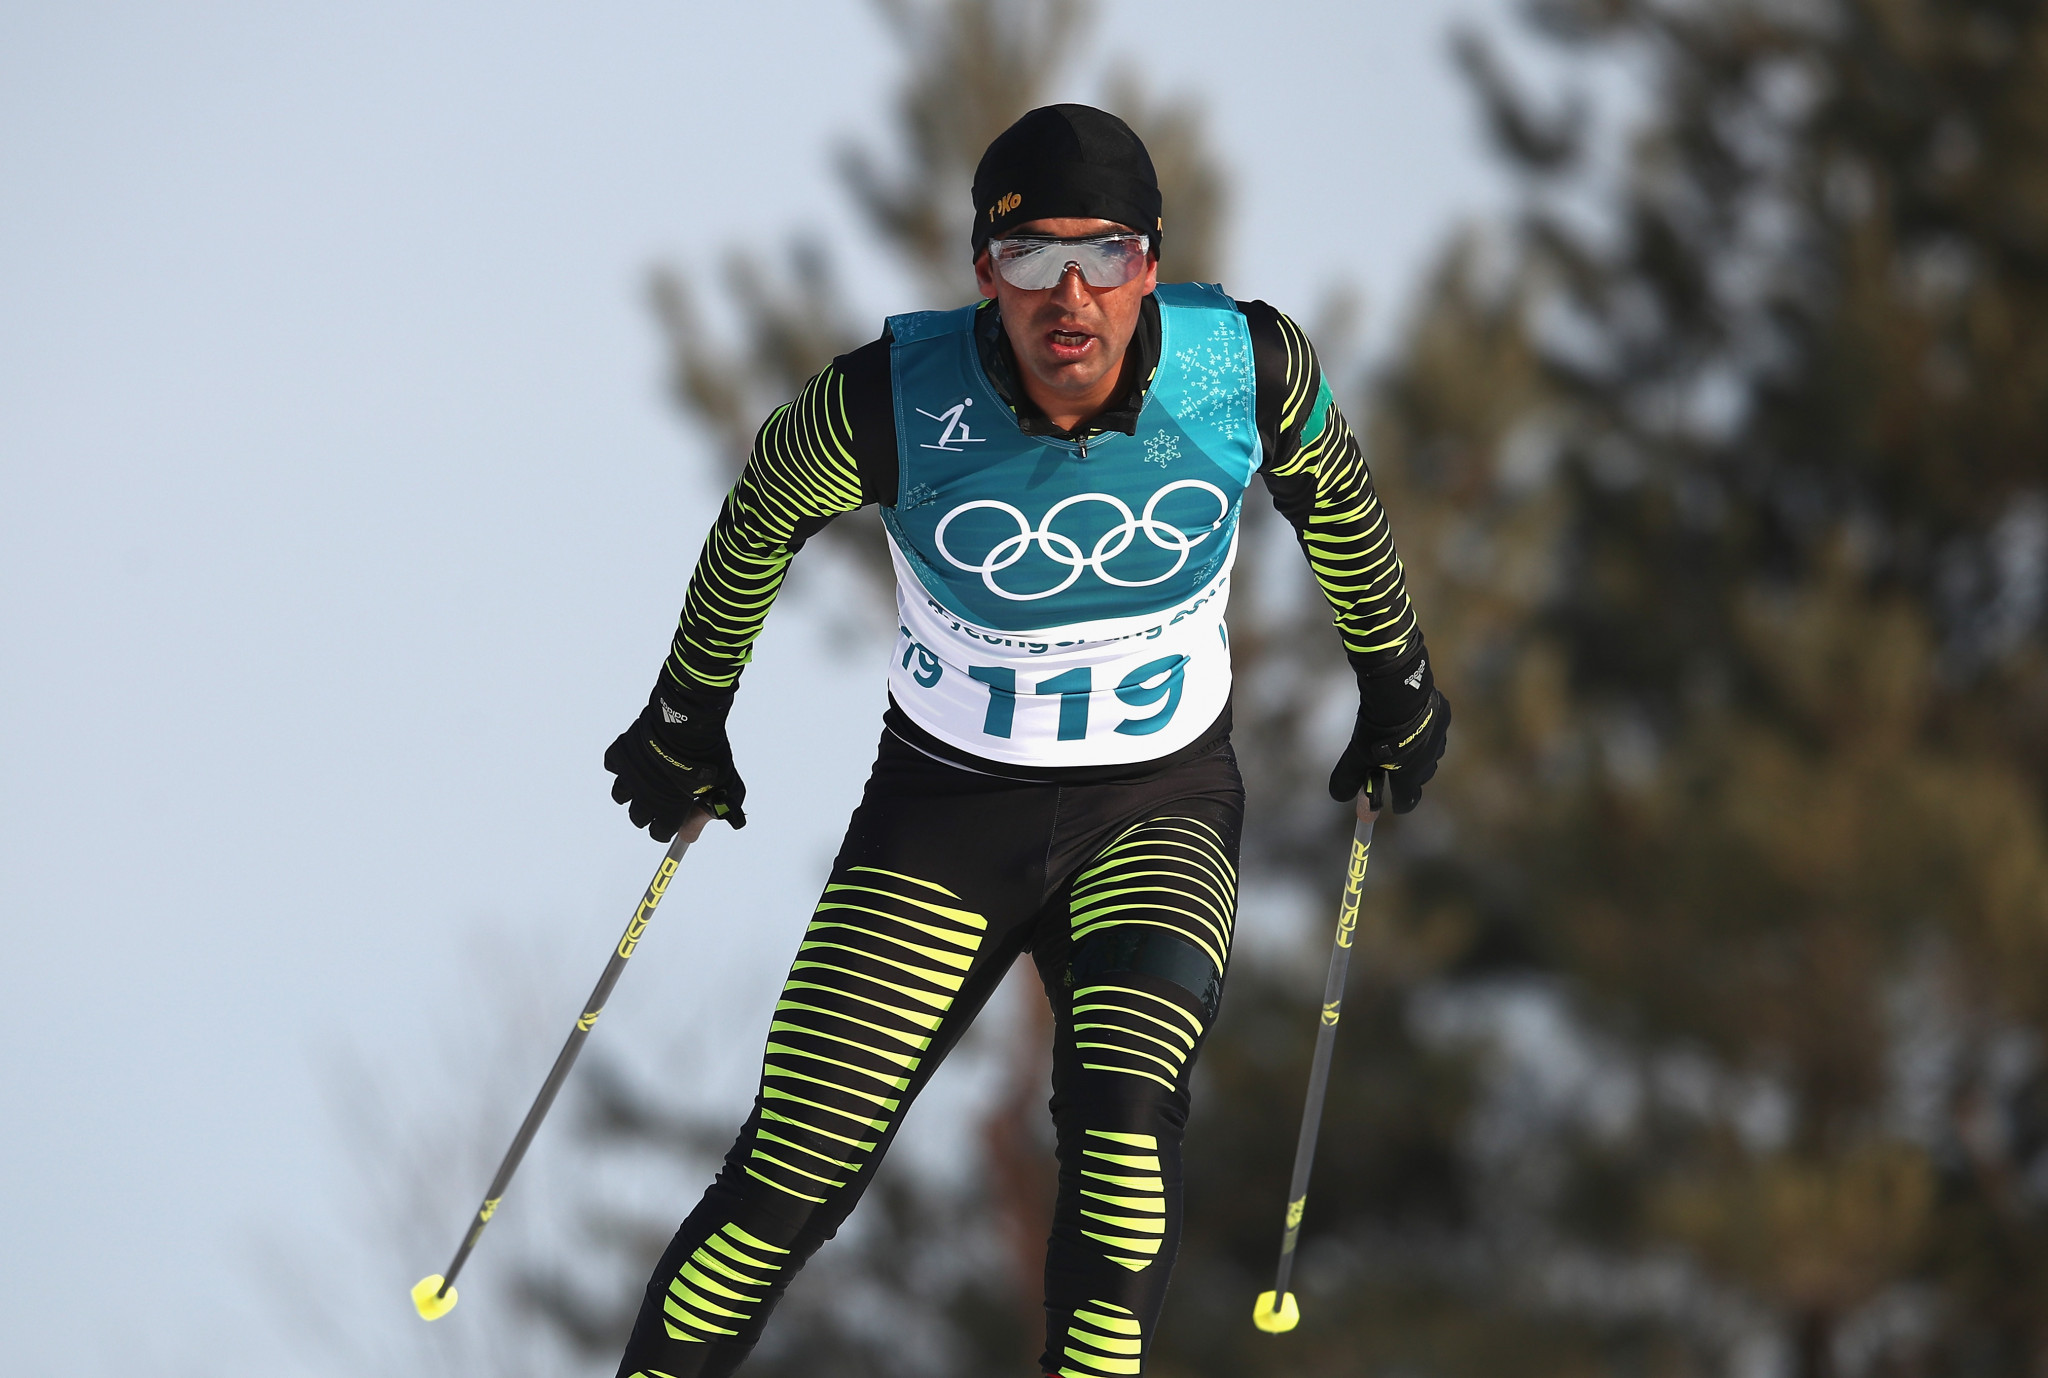 Syed Human competing in the men's 15km freestyle cross-country skiing at Pyeongchang 2018 ©Getty Images